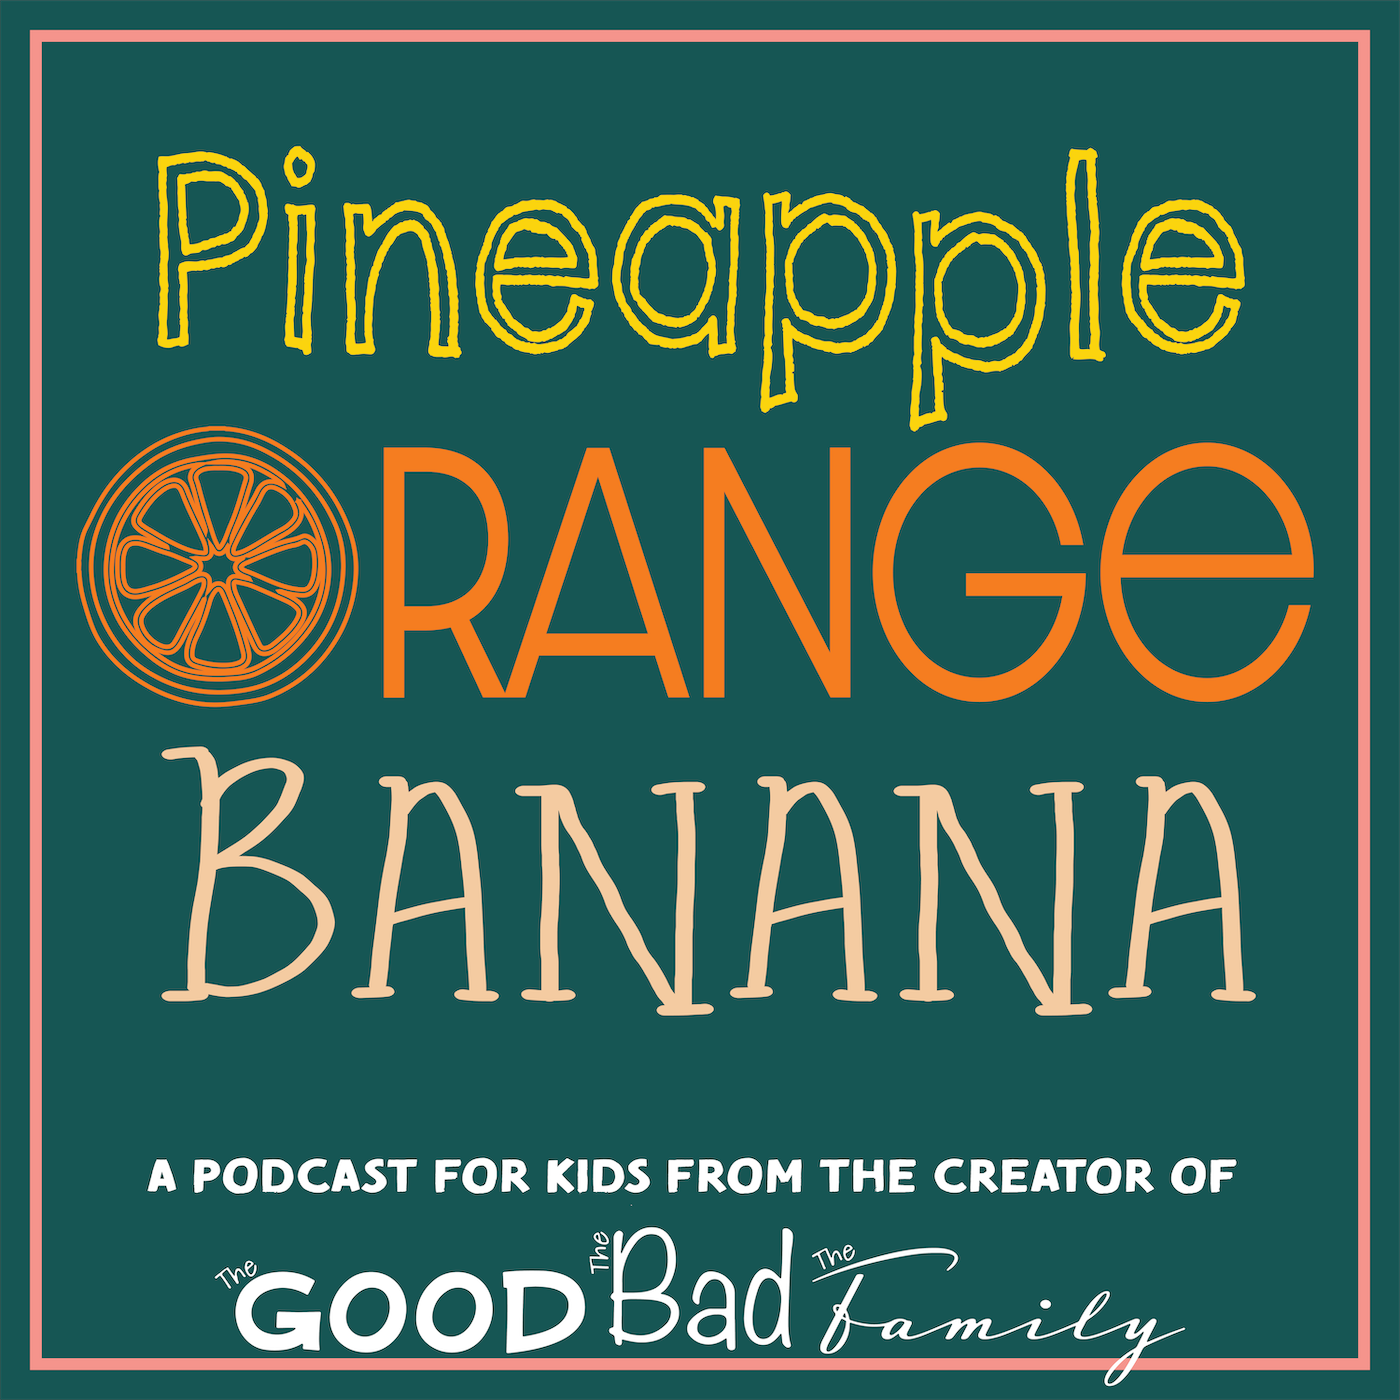 Pineapple, Orange, Banana: A Podcast for Kids and Family